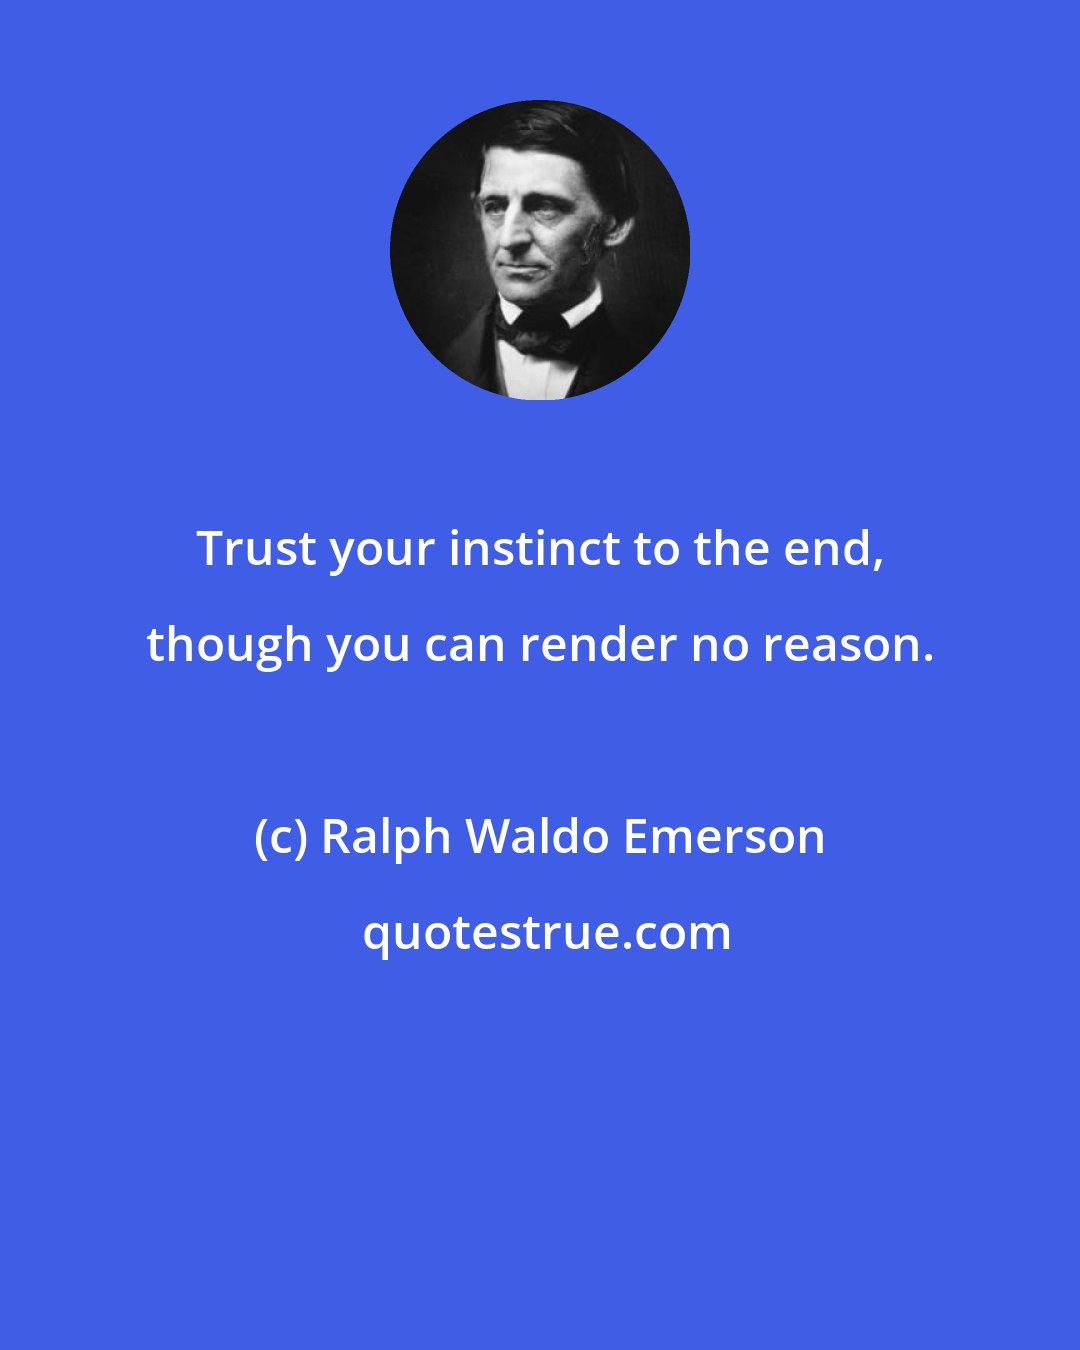 Ralph Waldo Emerson: Trust your instinct to the end, though you can render no reason.